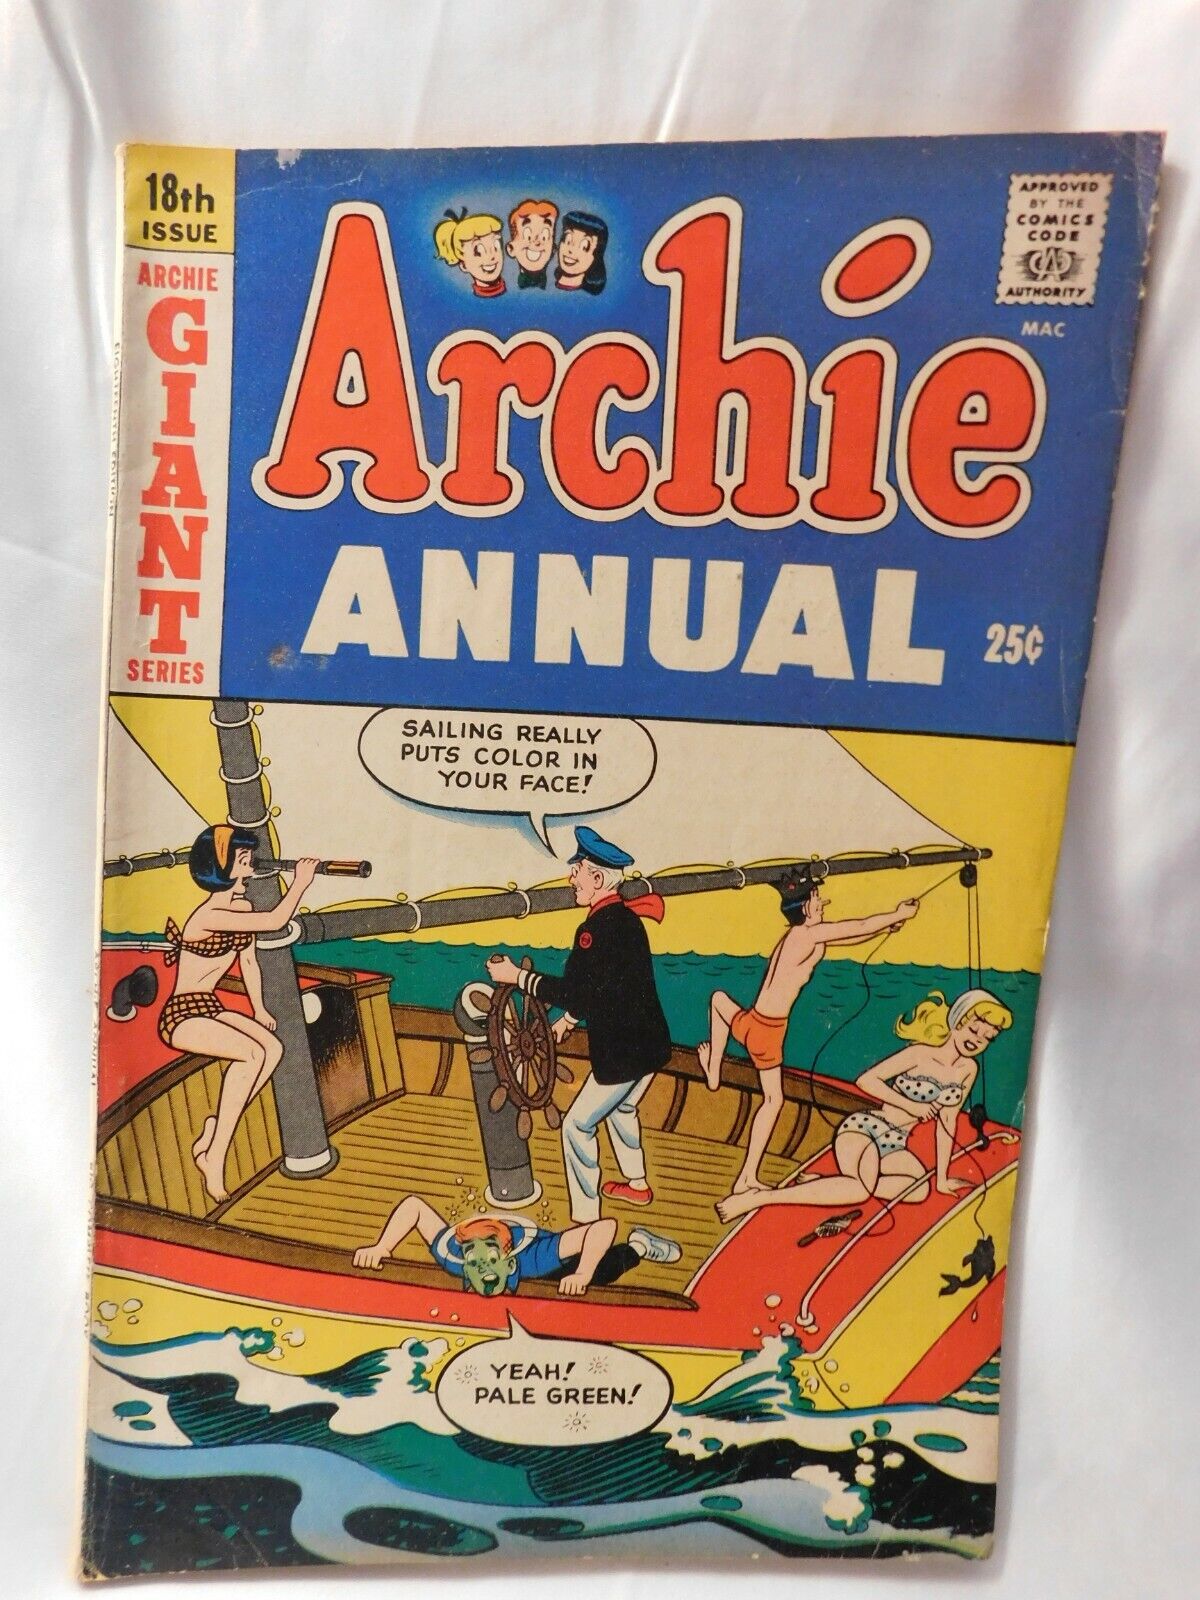 Archie Giant Series Comic Book Annual 18th Issue Silver 1966-1967